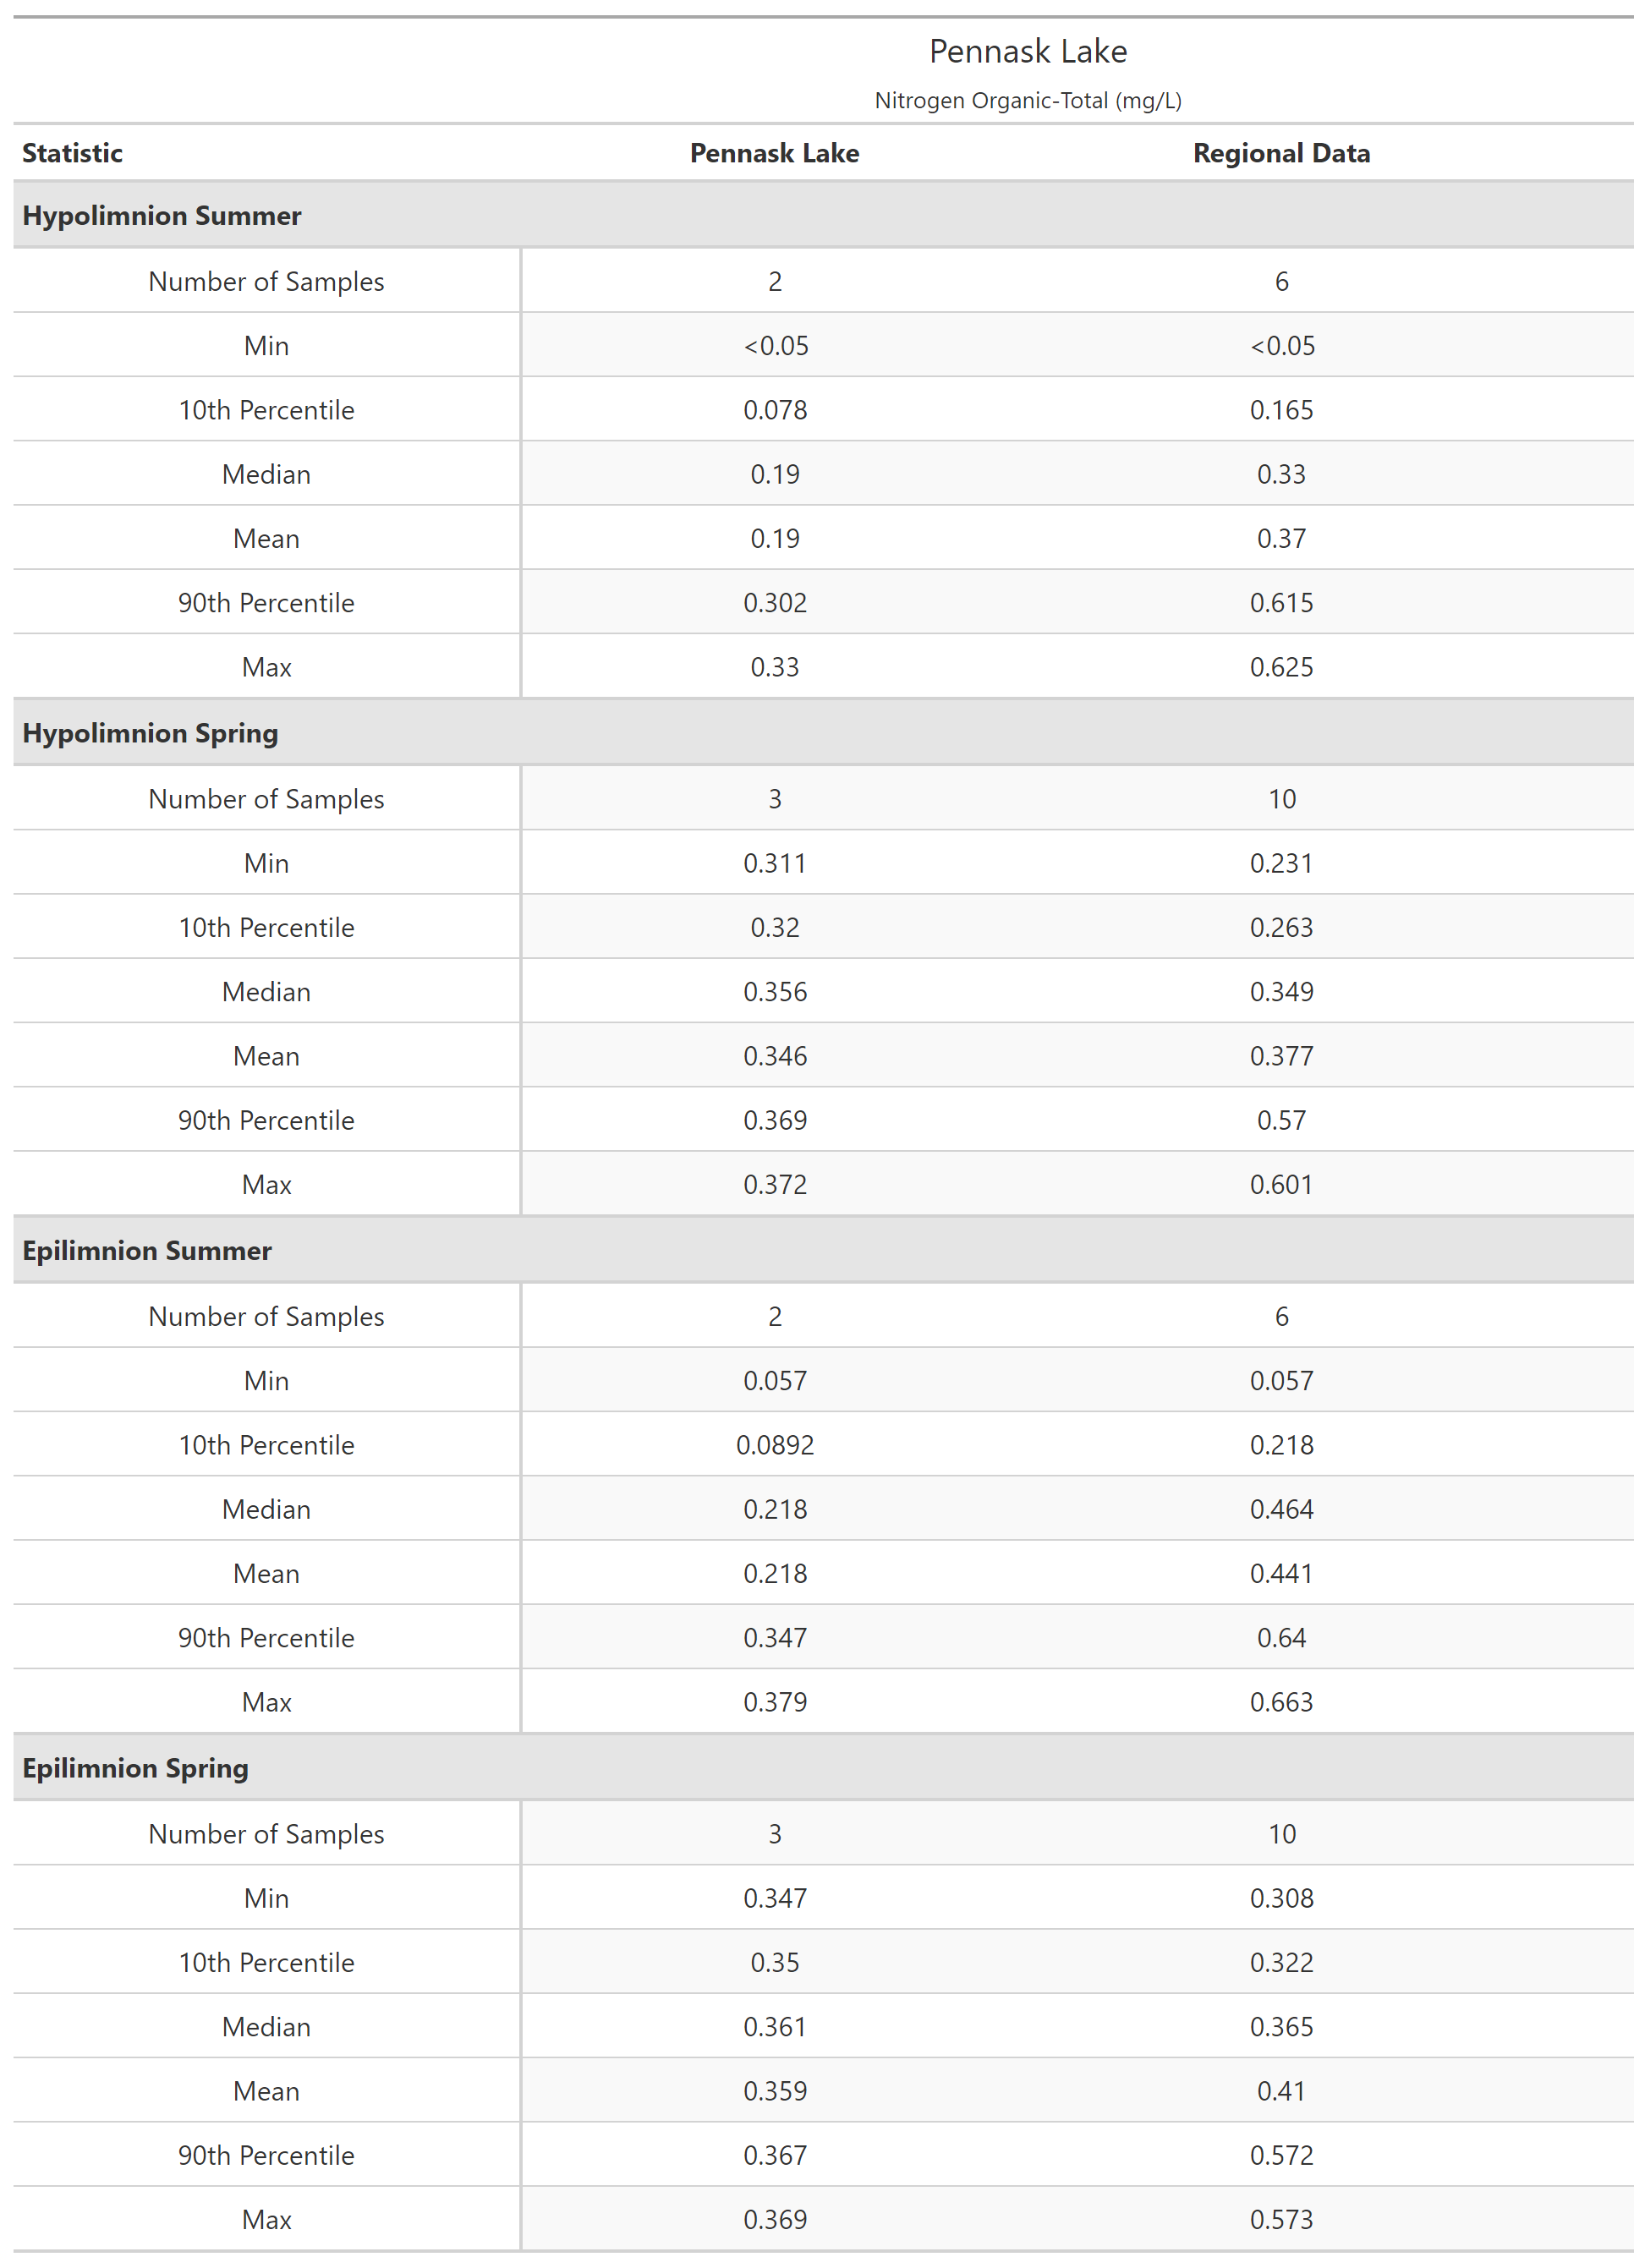 A table of summary statistics for Nitrogen Organic-Total with comparison to regional data